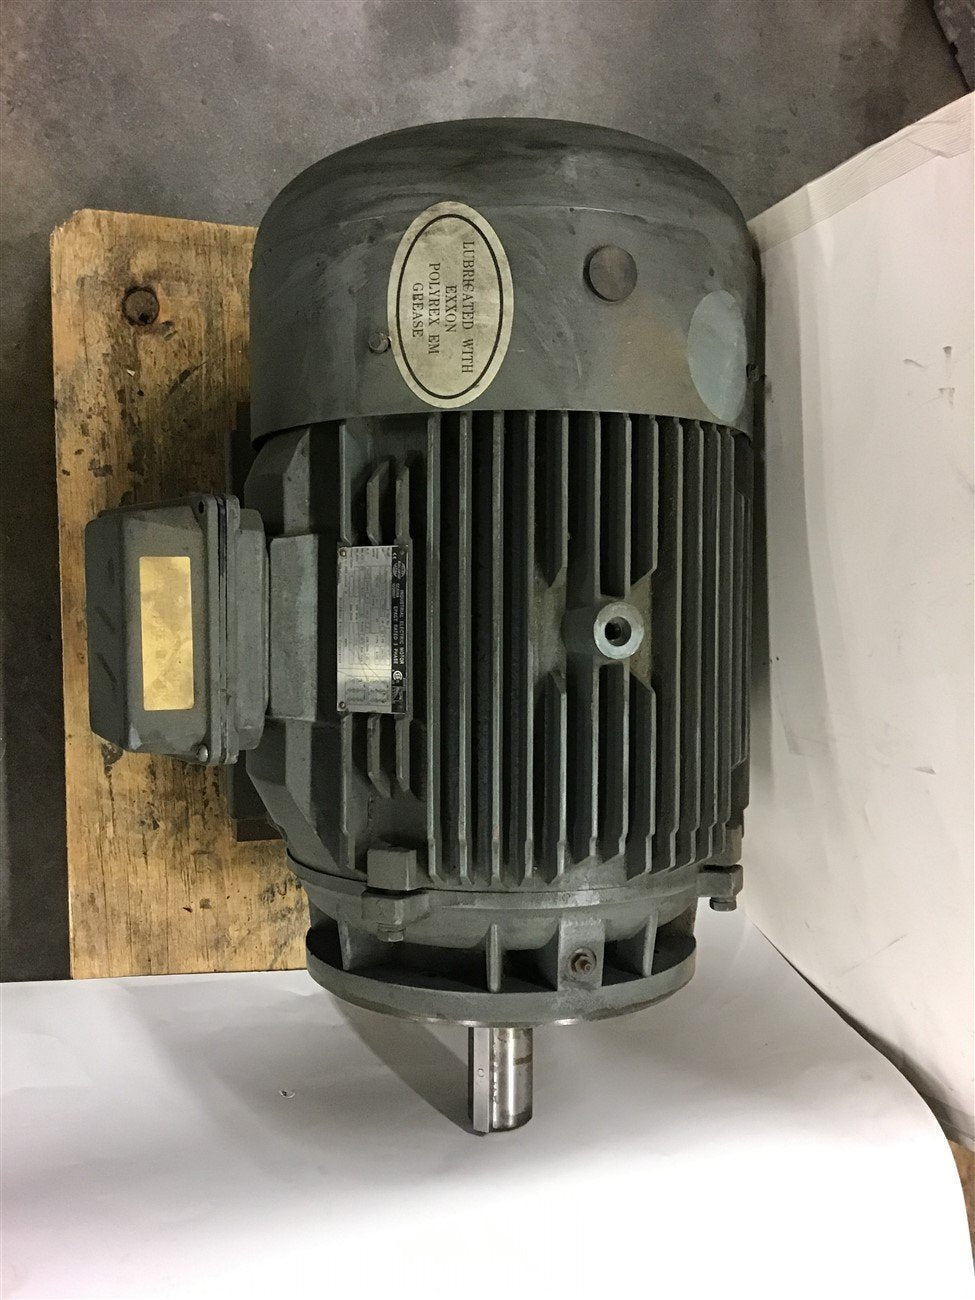 WORLDWIDE WWE15-12-284TC 15 HP AC MOTOR 230/460 VOLTS 1185 RPM 6P 284T –  BME Bearings and Surplus